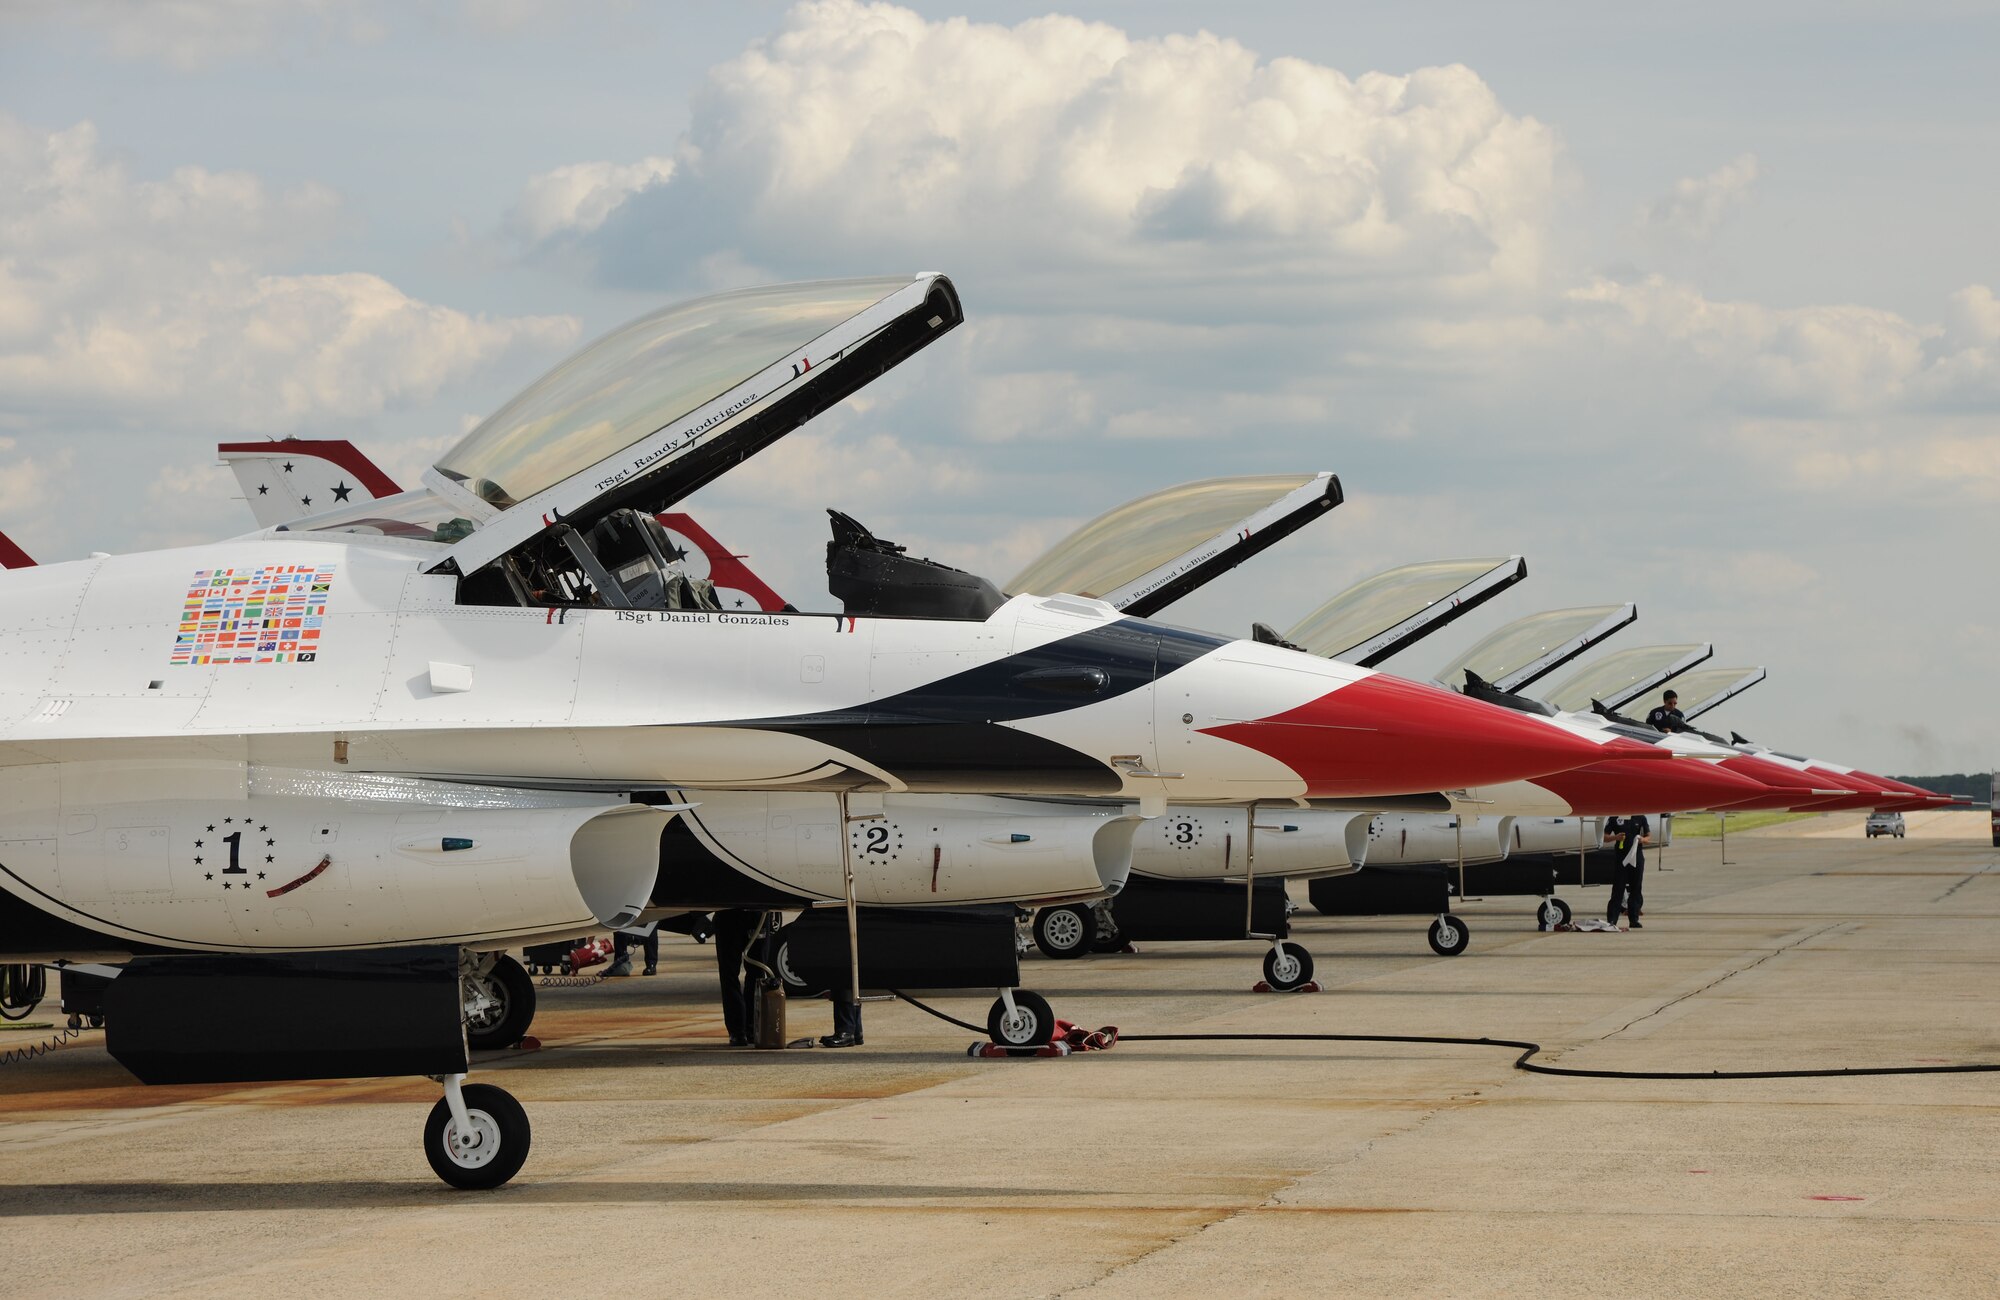 The U.S. Air Force Thunderbird's flight demonstration team aircraft stand ready for their post performance inspection and maintenance following their demonstration at the 2011 Joint Service Open House here May 21. The JSOH affords the public an opportunity to meet the men and women of the Armed Forces and to see military equipment from the Navy, Marines, Army, Air Force and Coast Guard. The JSOH is planned and conducted through the efforts of active duty, guard and reserve servicemembers, as well as civilian employees, retirees and family members. (U.S. Marine Corps. photo)